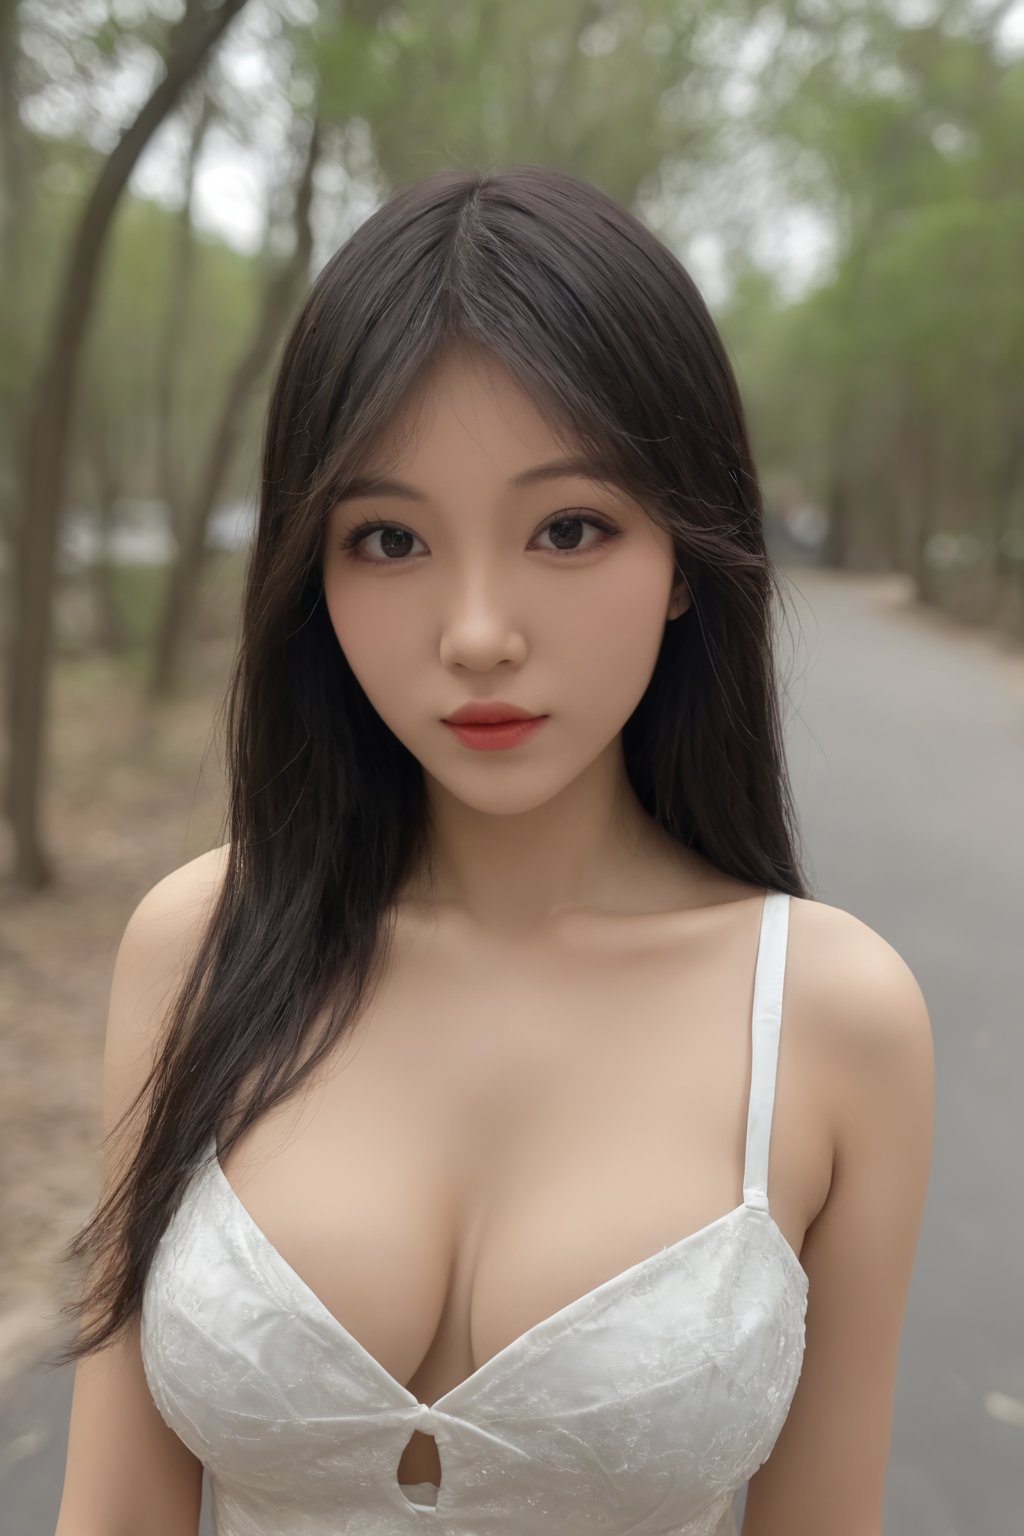 (ultra realistic,best quality),photorealistic,Extremely Realistic, in depth, cinematic light,hubggirl,

1girl, long black straight hair with bangs, looking at viewer, relaxing expression, clearly brown eyes, longfade eyebrow, soft make up, ombre lips, large breast, hourglass body, finger detailed, BREAK wearing half naked floral cheongsam, holding flower, (smeling flower), (spring season theme:1.5), windy, spring forest background detailed,

perfect lighting, vibrant colors, intricate details,
high detailed skin, pale skin,
intricate background, realism,realistic,raw,analog,portrait,photorealistic,
taken by Canon EOS,SIGMA Art Lens 35mm F1.4,ISO 200 Shutter Speed 2000,Vivid picture,